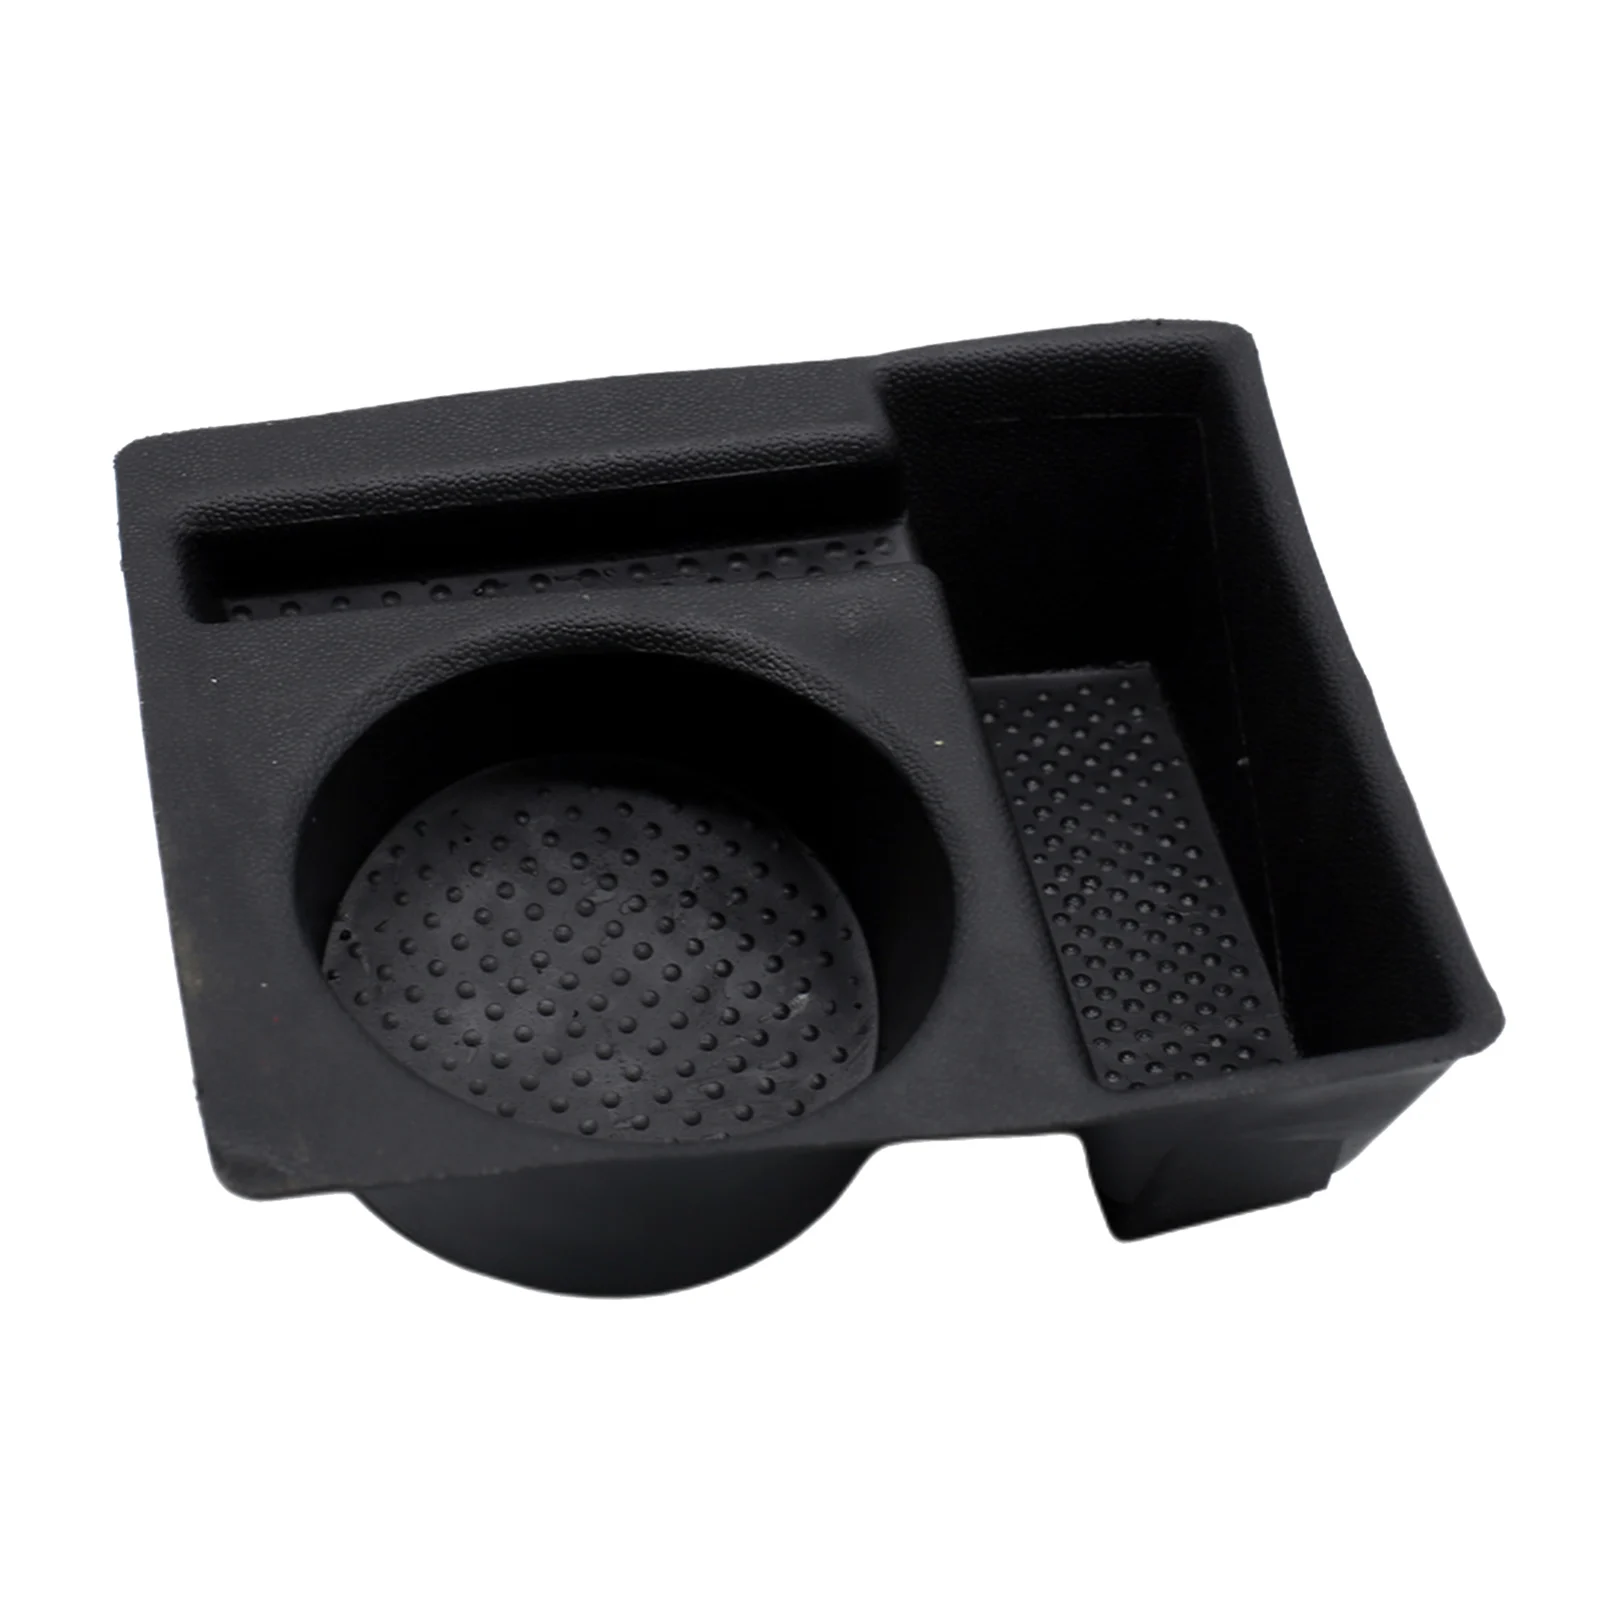 Semoic Front Central Cup Holder Coin Holder Ashtray 9425E4 for C3 DS3 2009-2019 9425E4 